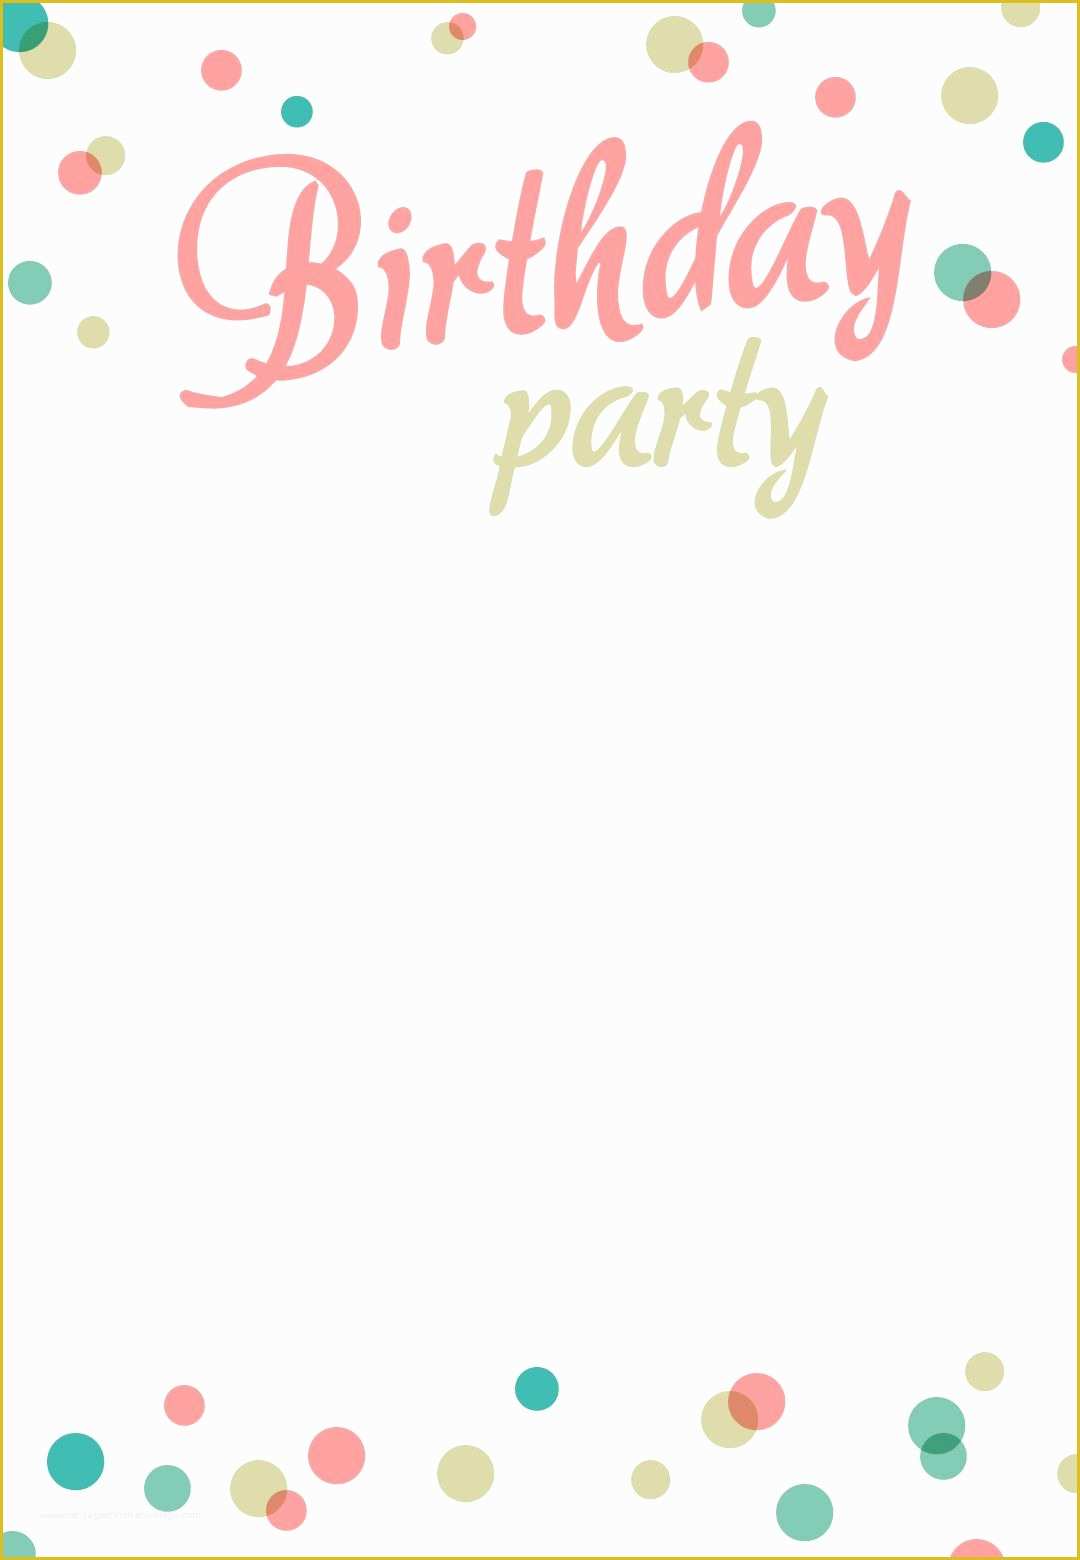 birthday-wishes-templates-free-download-of-birthday-party-invitation